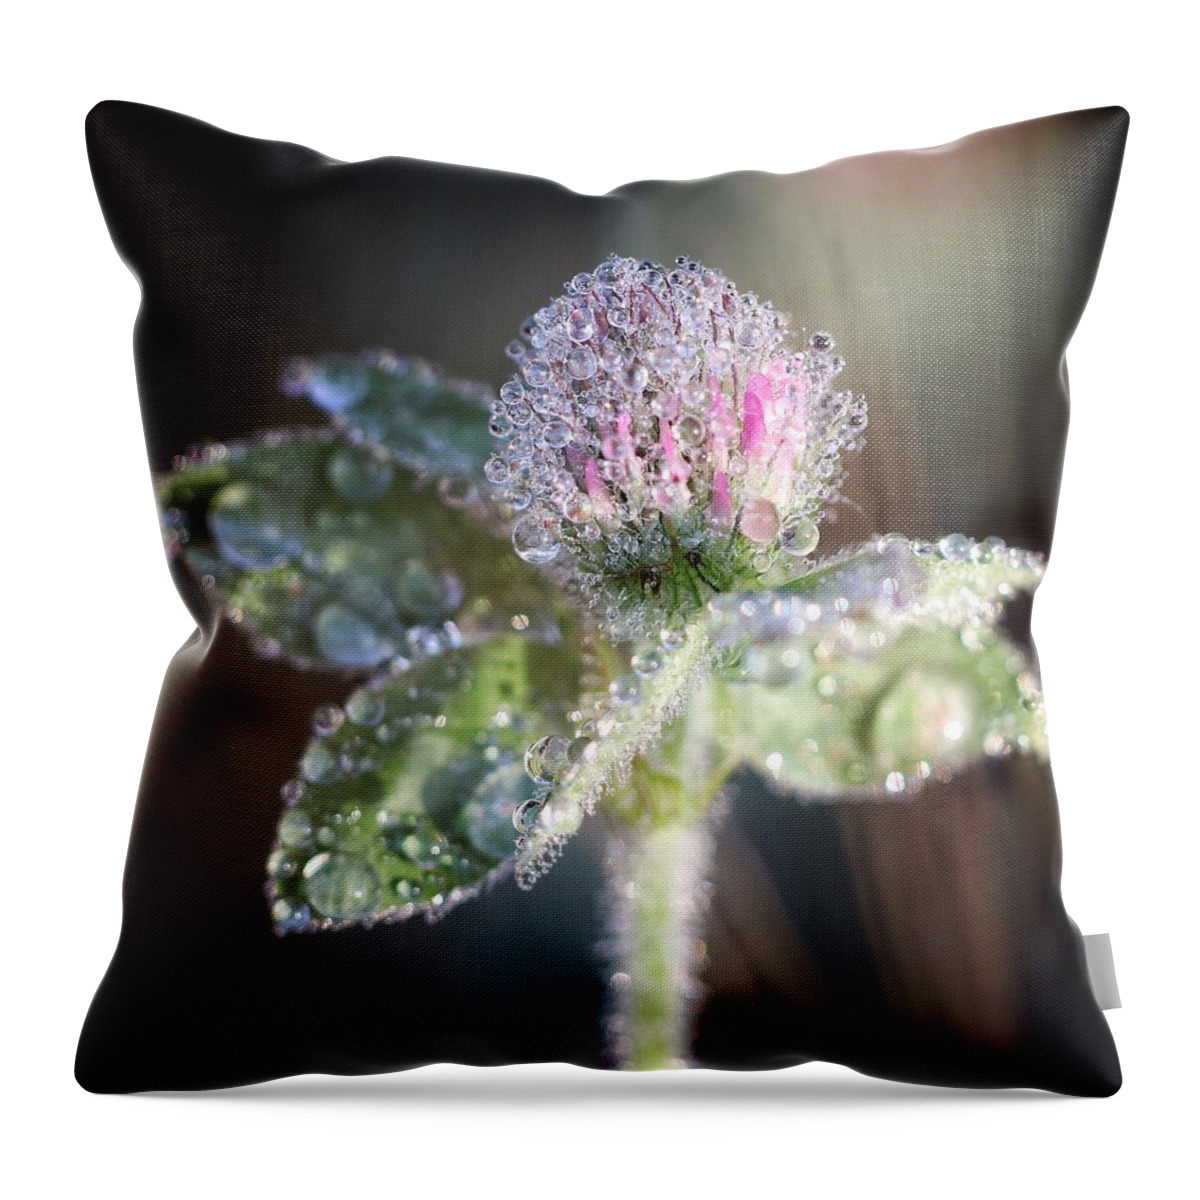 Flower Throw Pillow featuring the photograph Dew on Clover by Alisa Smith Williams